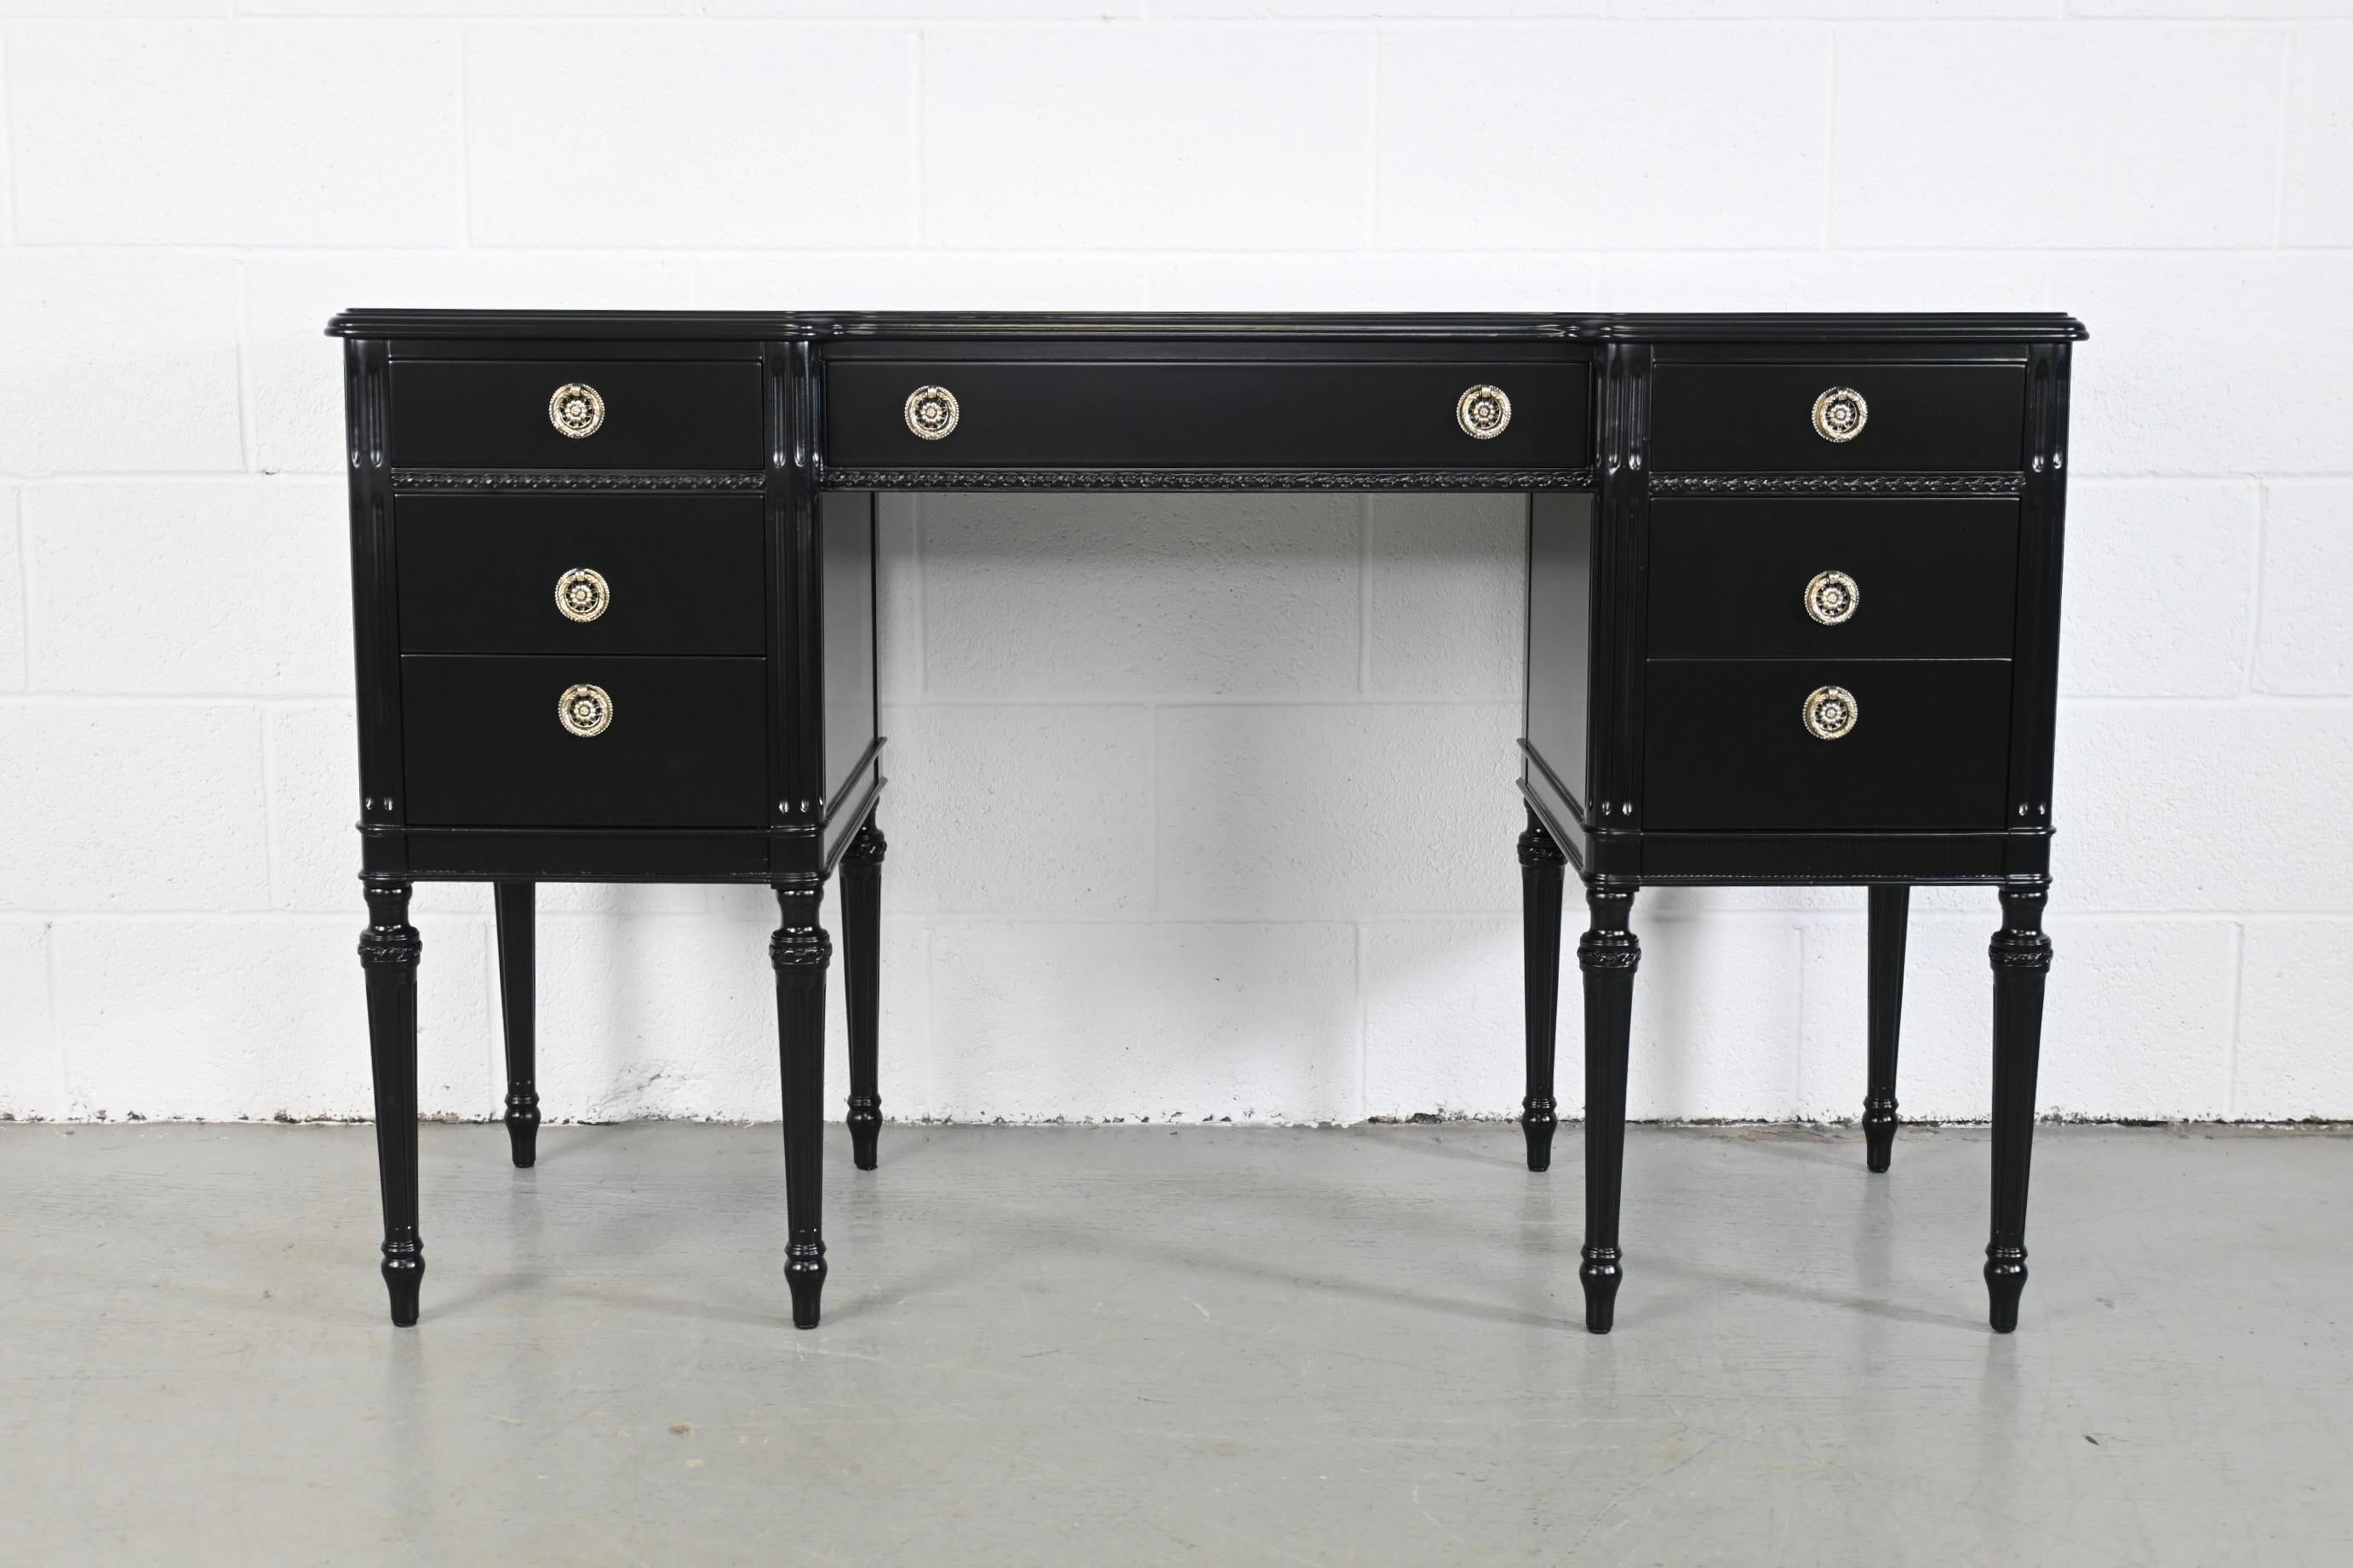 Robert W. Irwin Louis XVI Style Black Lacquered Seven Drawer Desk

Robert W. Irwin Furniture Co., USA, 1940s

50 Wide x 17.75 Deep x 30.25

Louis XVI Style black lacquered desk with seven drawers and brass pulls.

Professionally refinished.